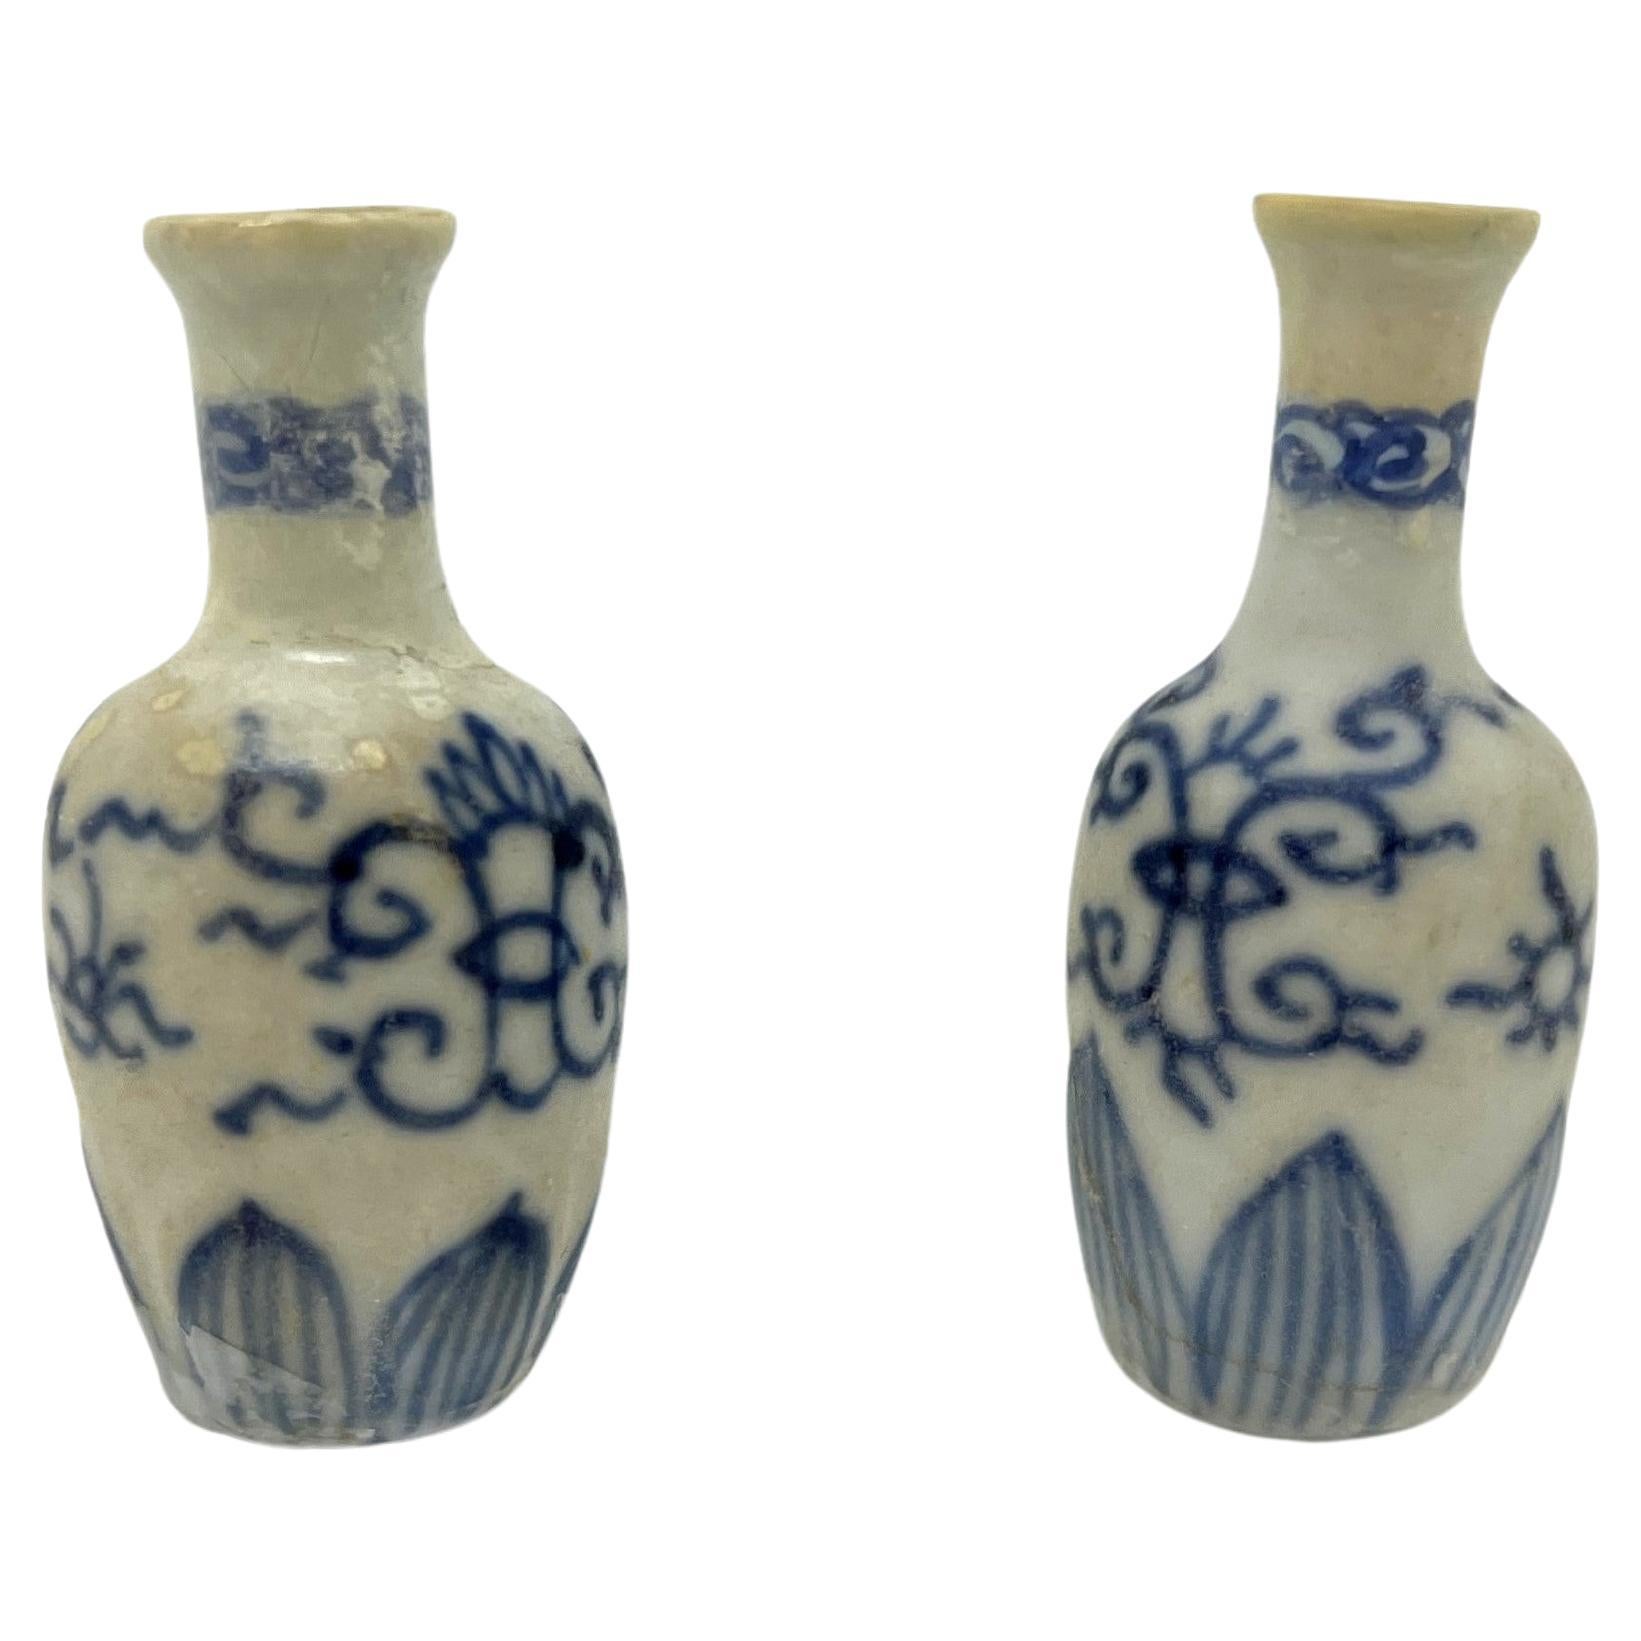 Two Blue and White Miniature Vases, C 1725, Qing Dynasty, Yongzheng Era For Sale